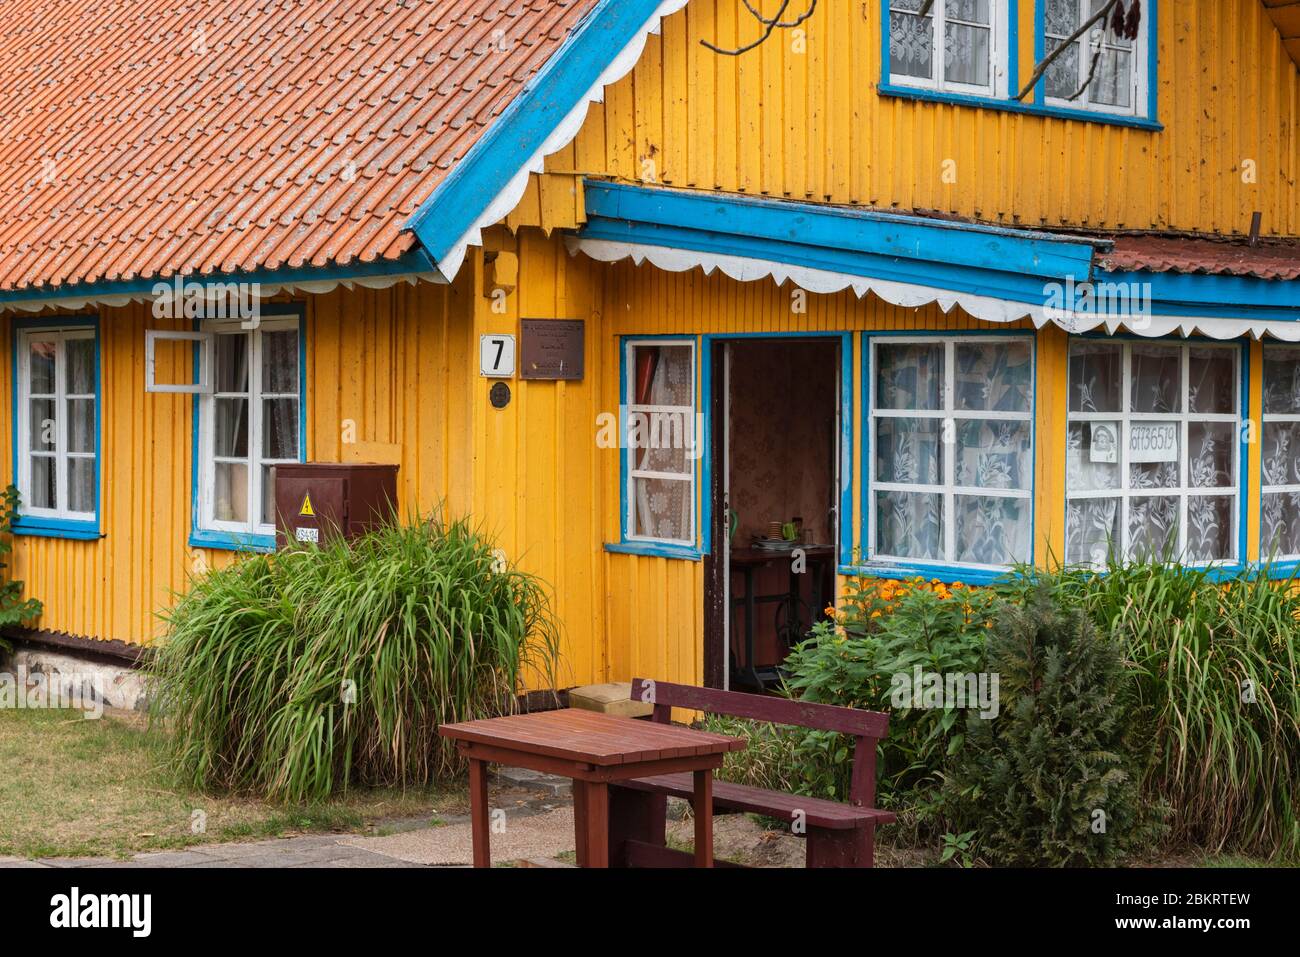 Lithuania (Baltic States), Klaipeda County, Nida, Curonian Spit National Park, traditionnal house Stock Photo